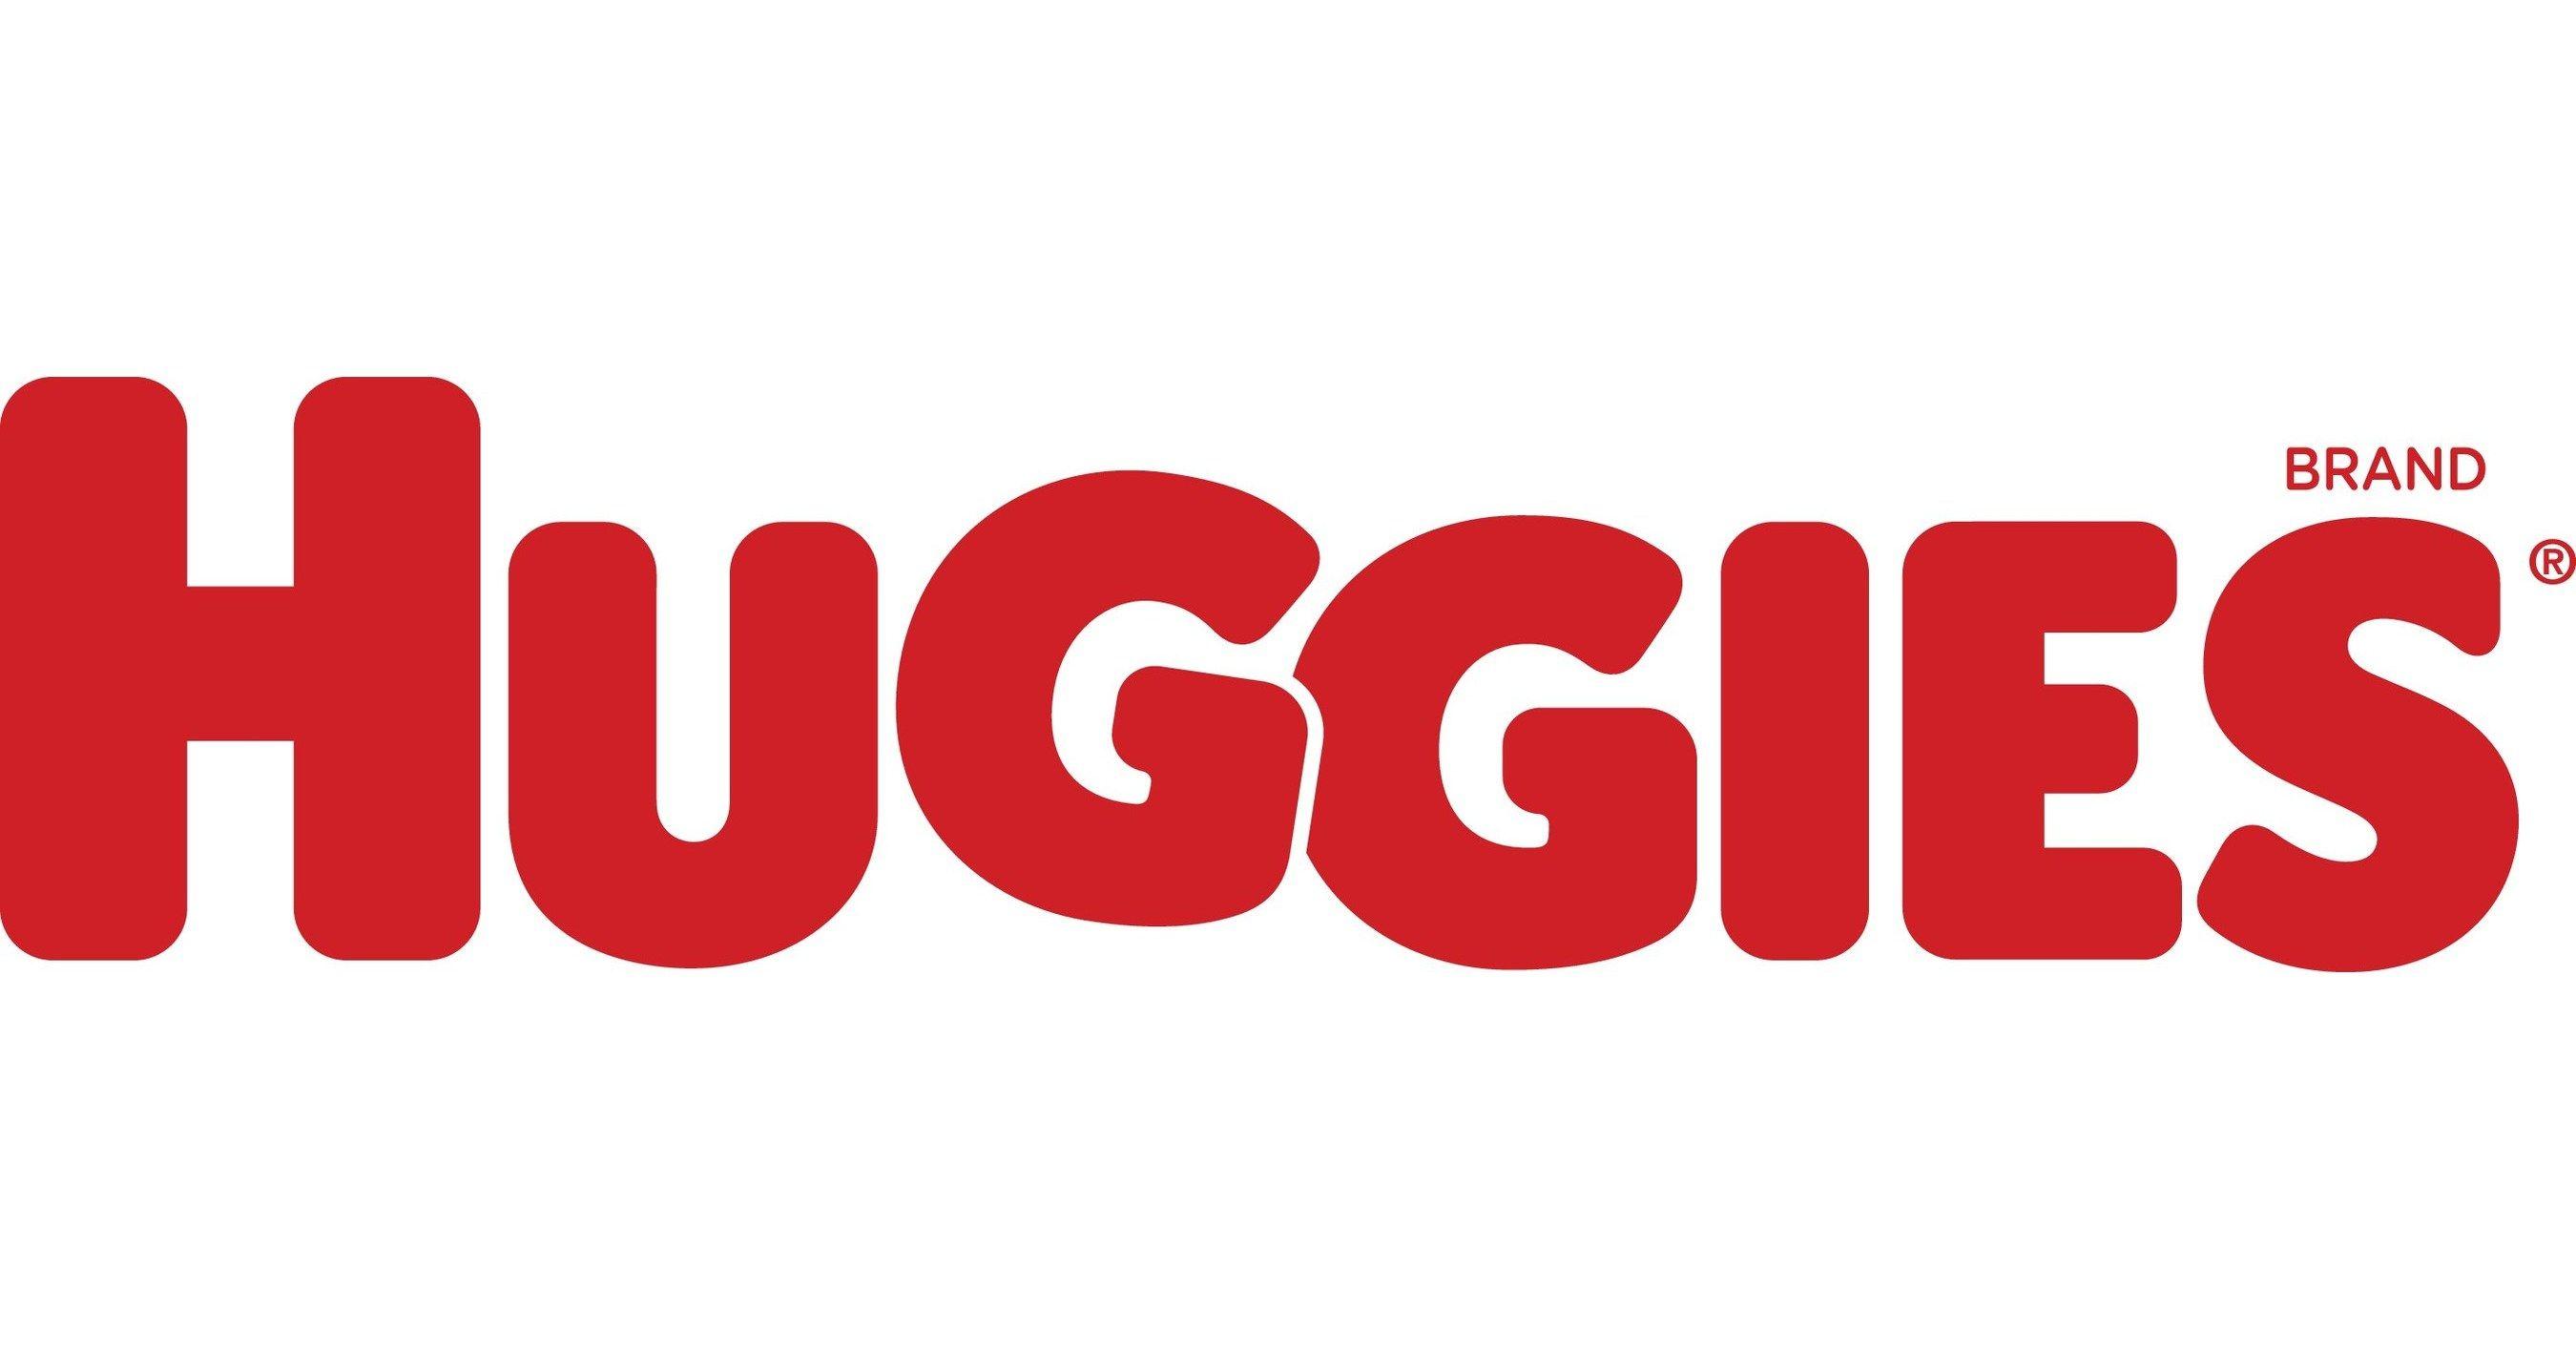 Huggies Logo - Huggies Brand Introduces Their Most Perfect Diaper Ever